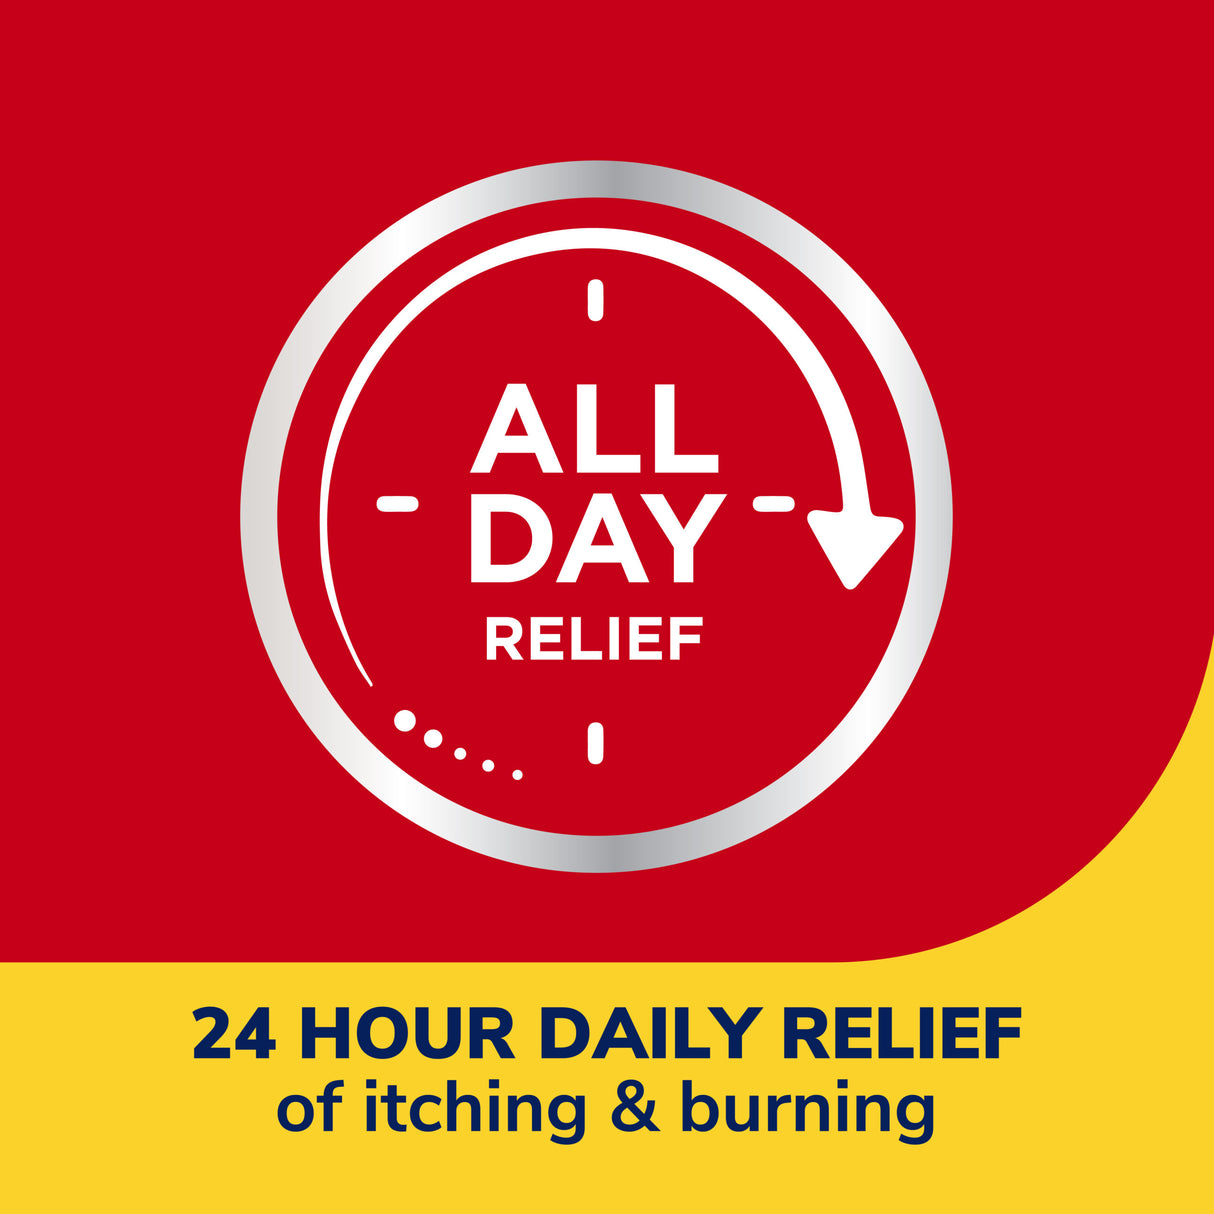 image of 24 hour daily relief of itching & burning